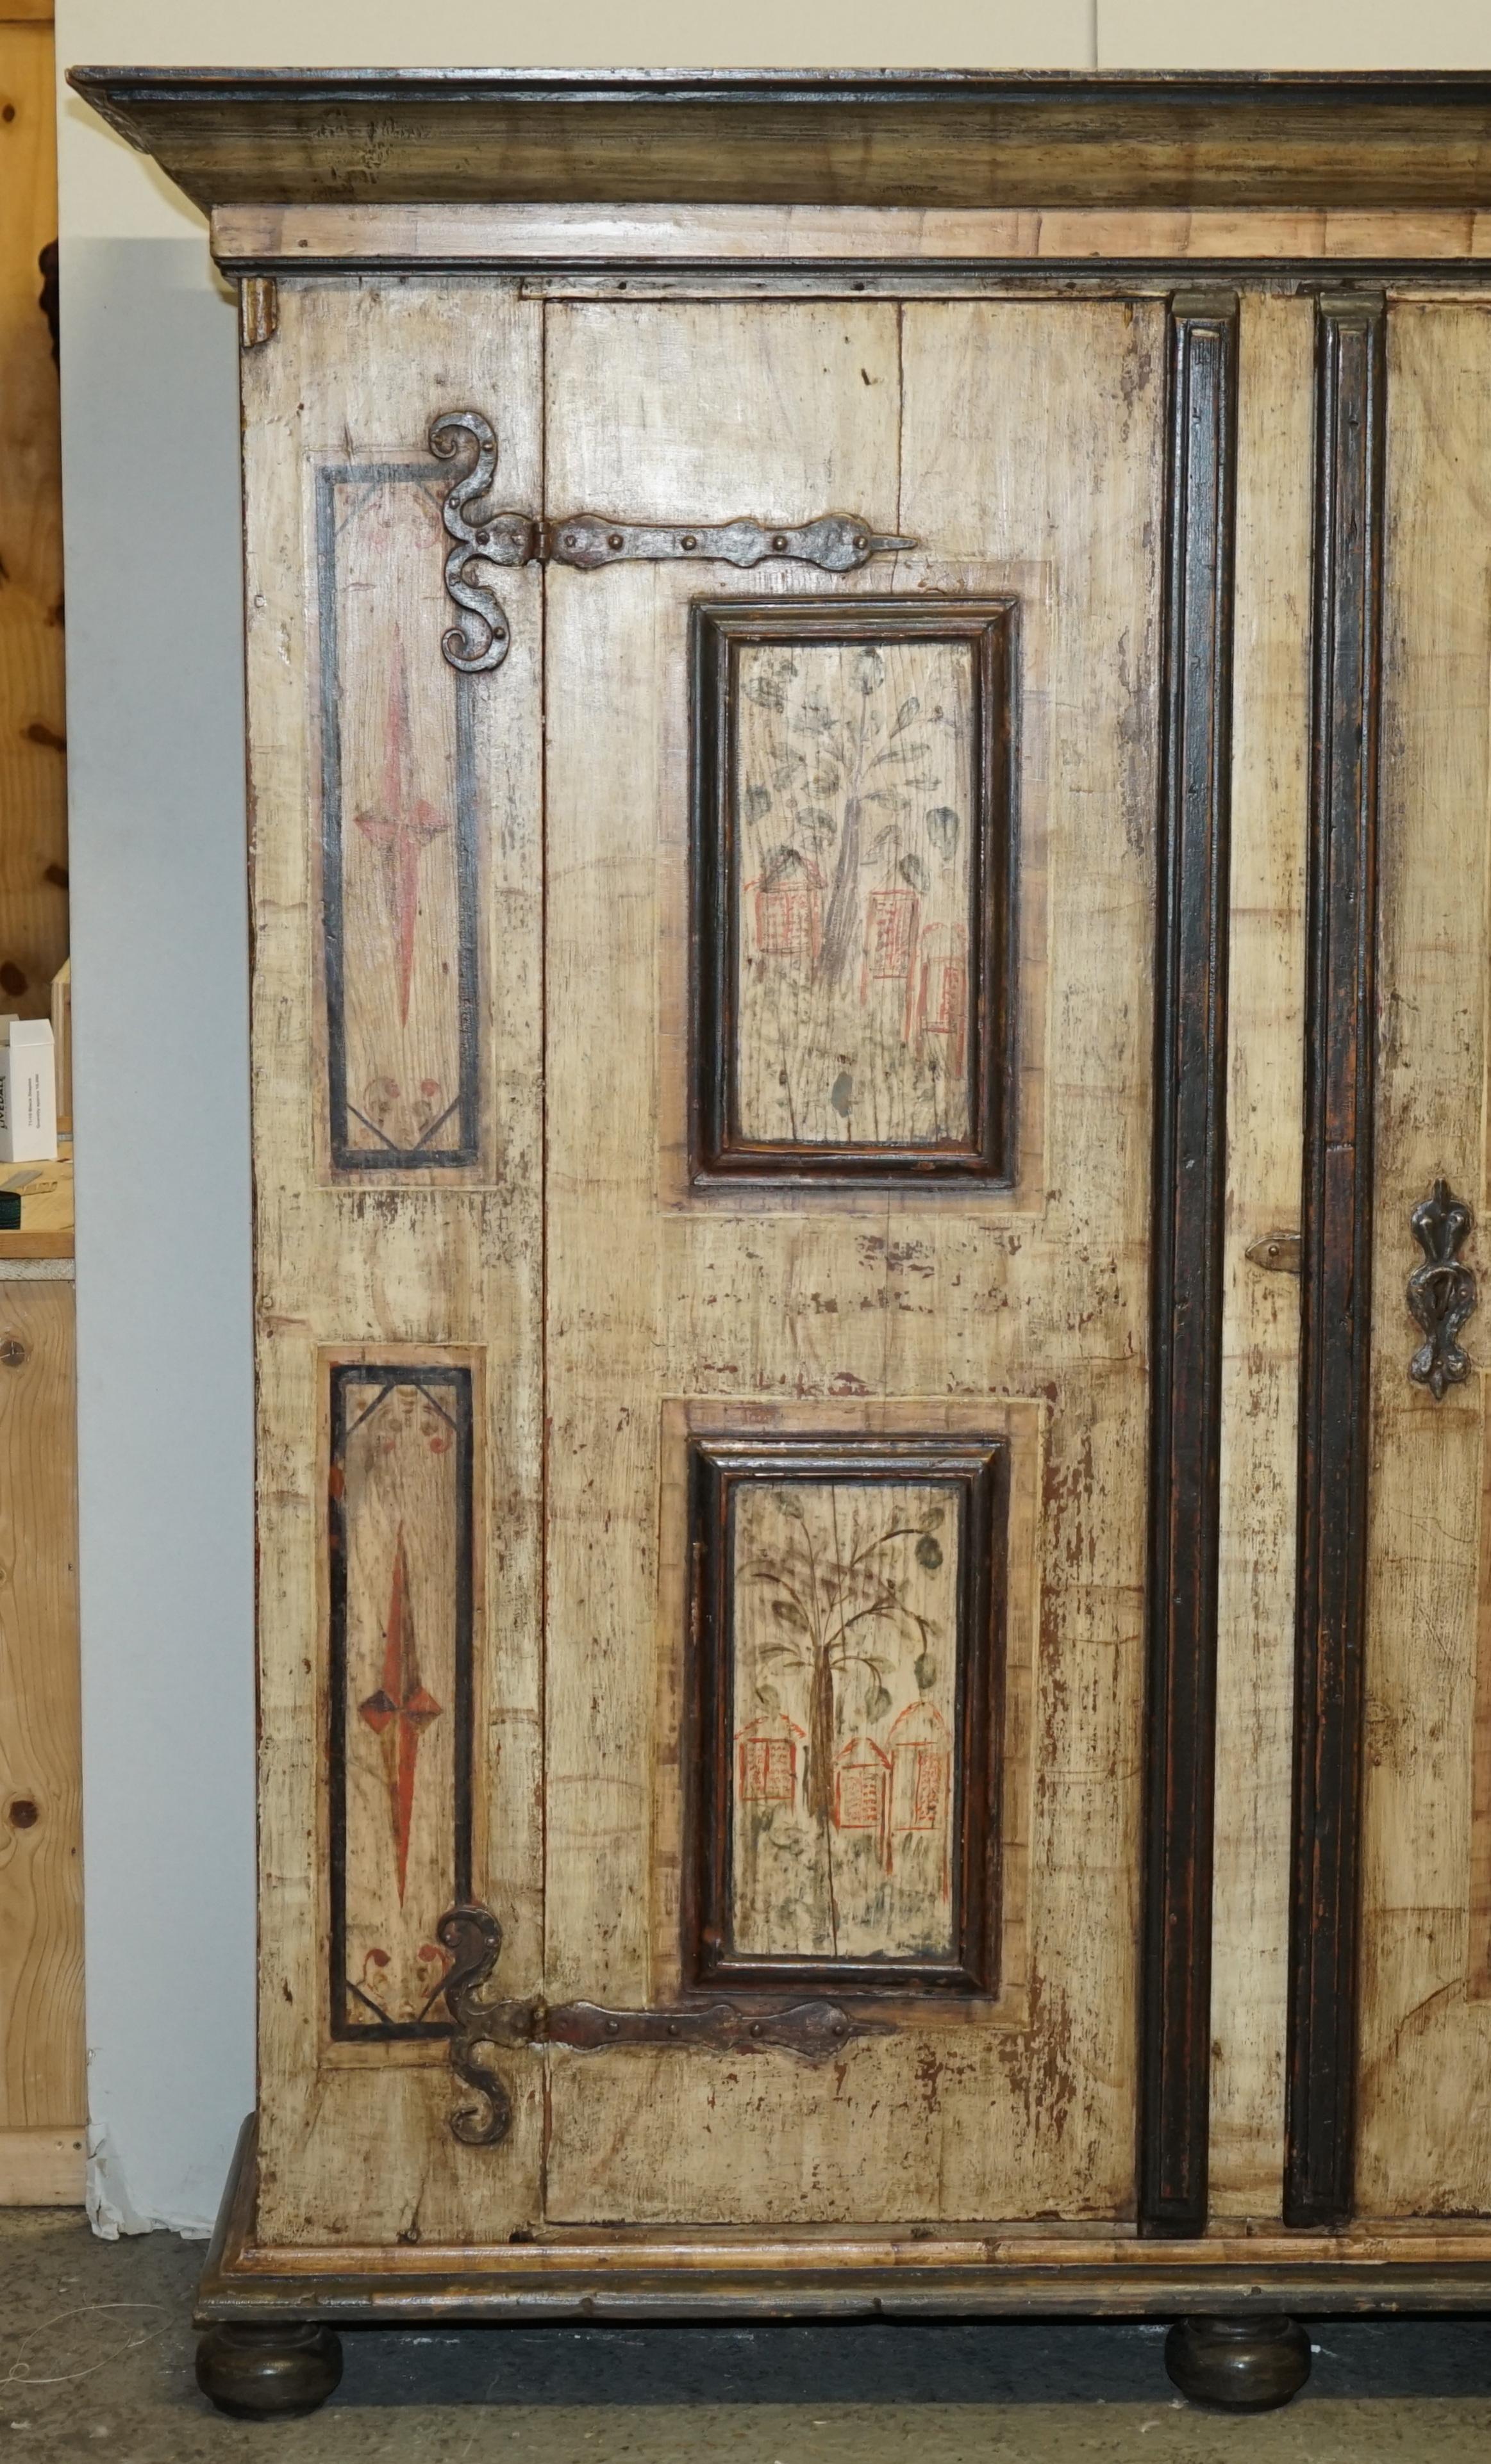 We are delighted to offer for sale this stunning, very large original 1800 Antique German Marriage wardrobe / housekeepers folded linen cupboard with super are original Tree of Life paintings and baroque stars

I have recently purchased a very